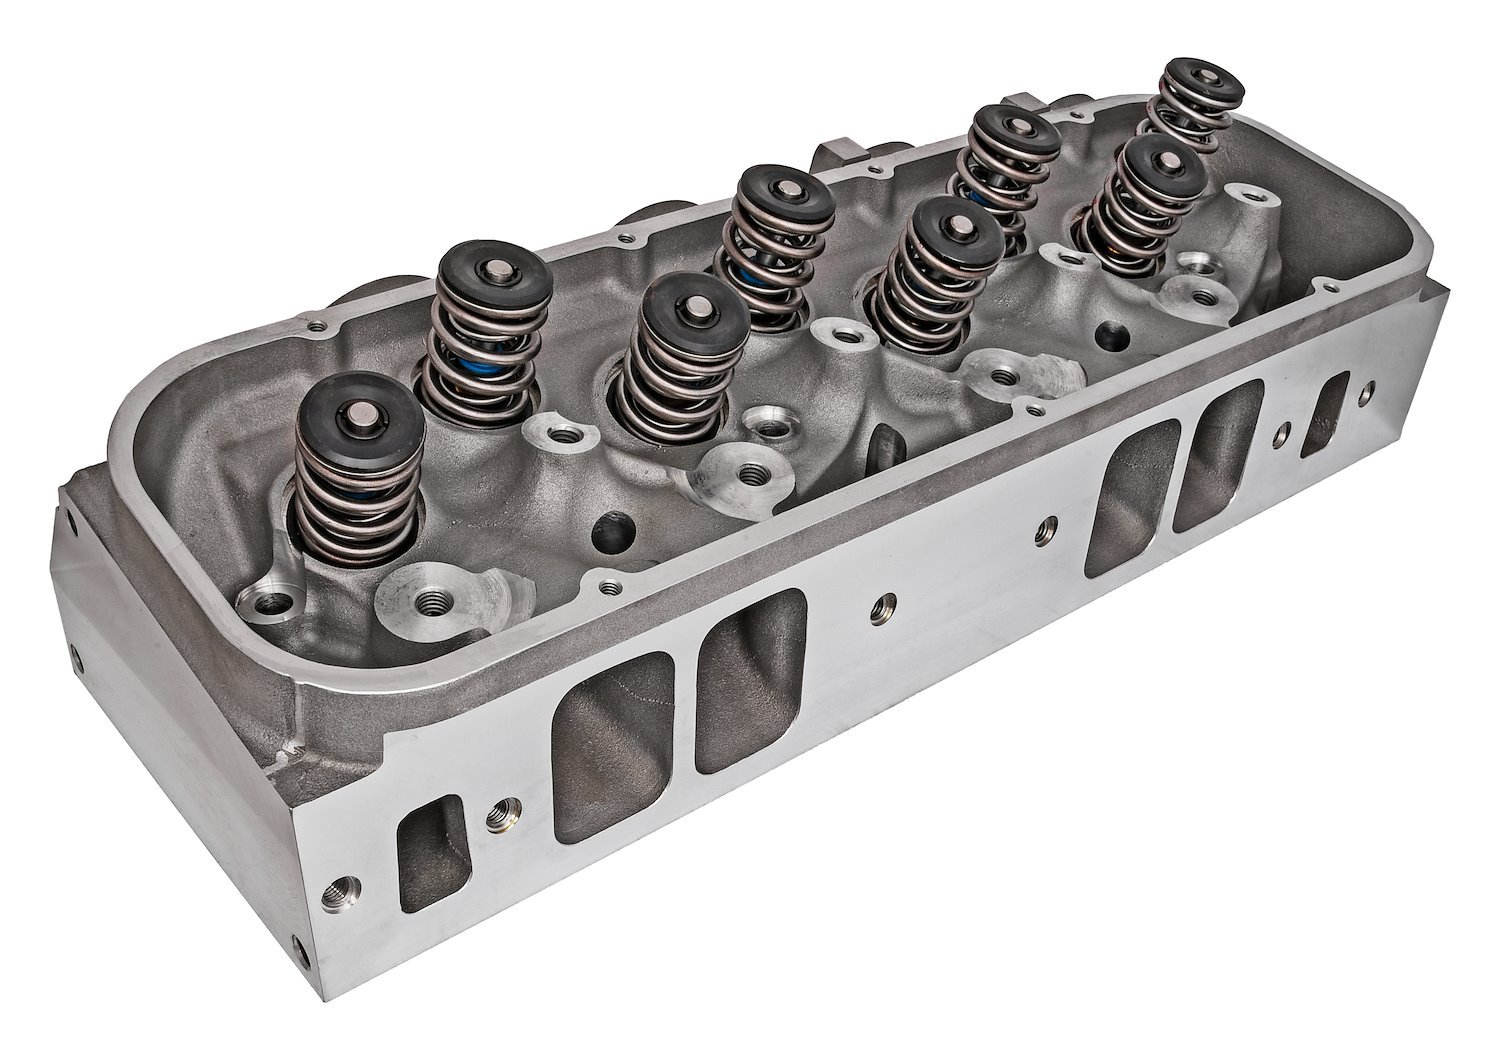 Big Block Chevy Aluminum Cylinder Head for use with Hydraulic Flat Tappet Cam [335 cc Intake Ports, Straight Angle Spark Plugs]